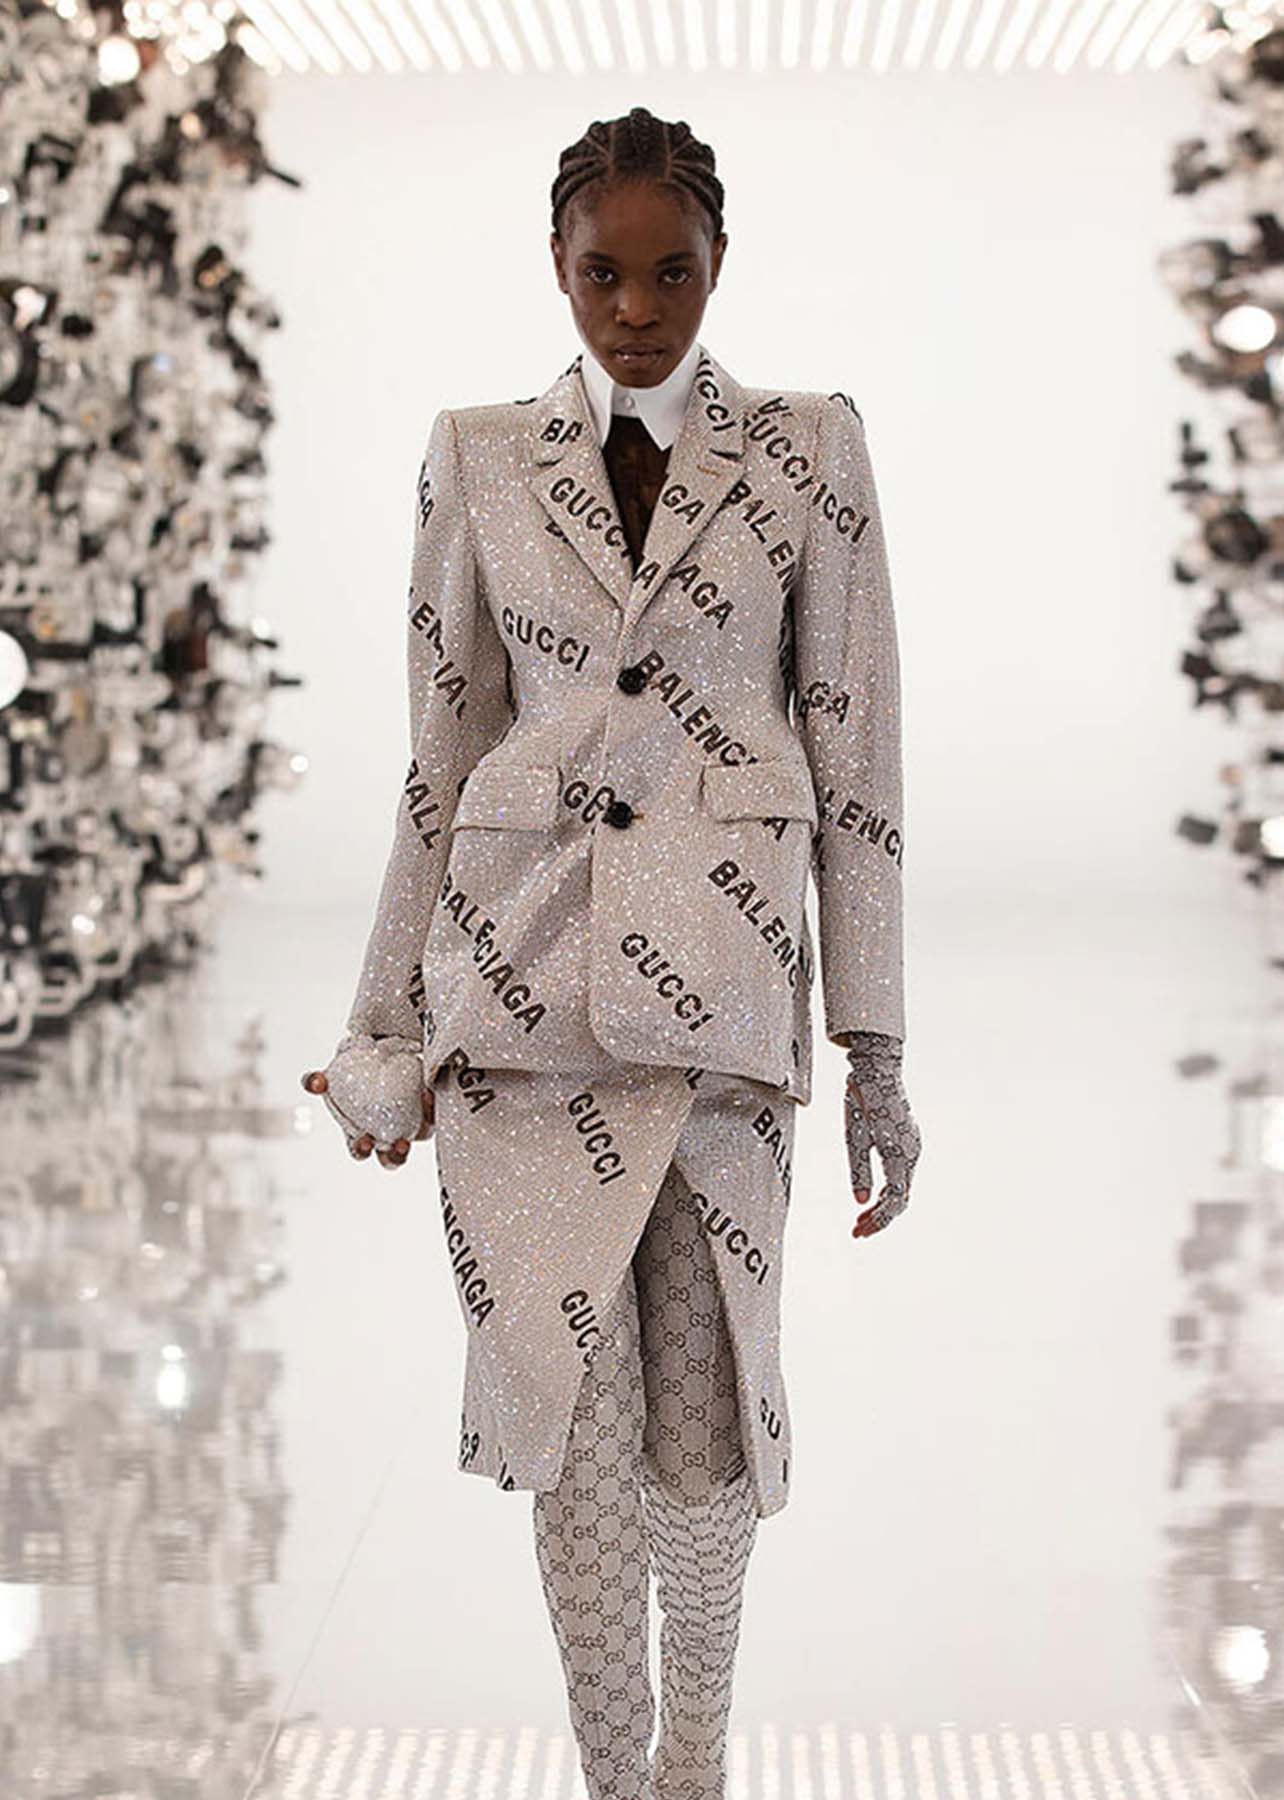 Metallic coat and skirt with Gucci and Balenciaga lettering across the clothing